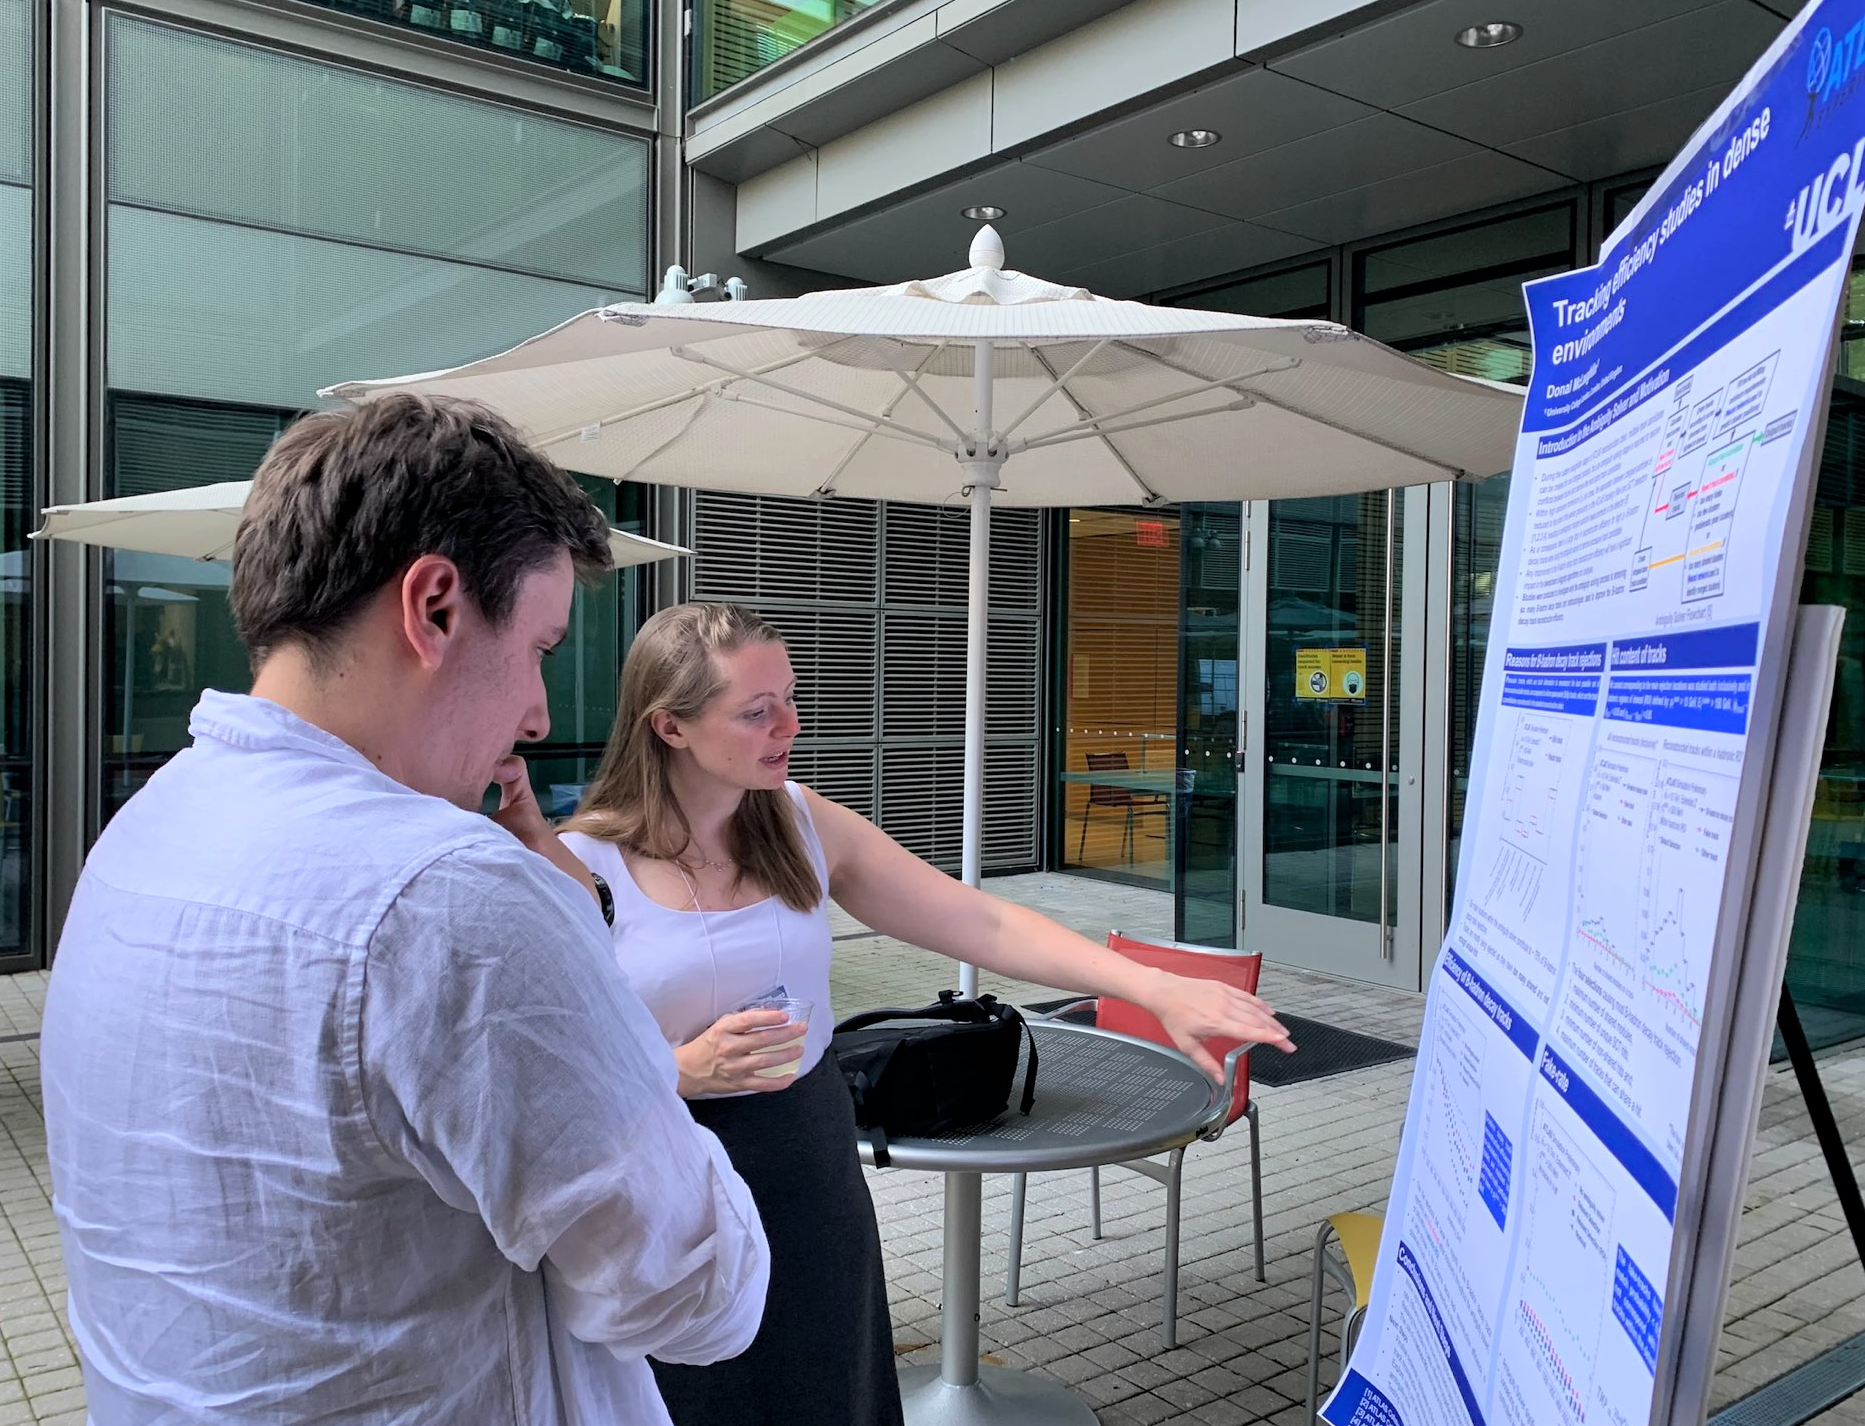 Liv Vage of Imperial College and Donal Joseph Mclaughlin from University College London during the poster session at the CTD 2022 workshop.